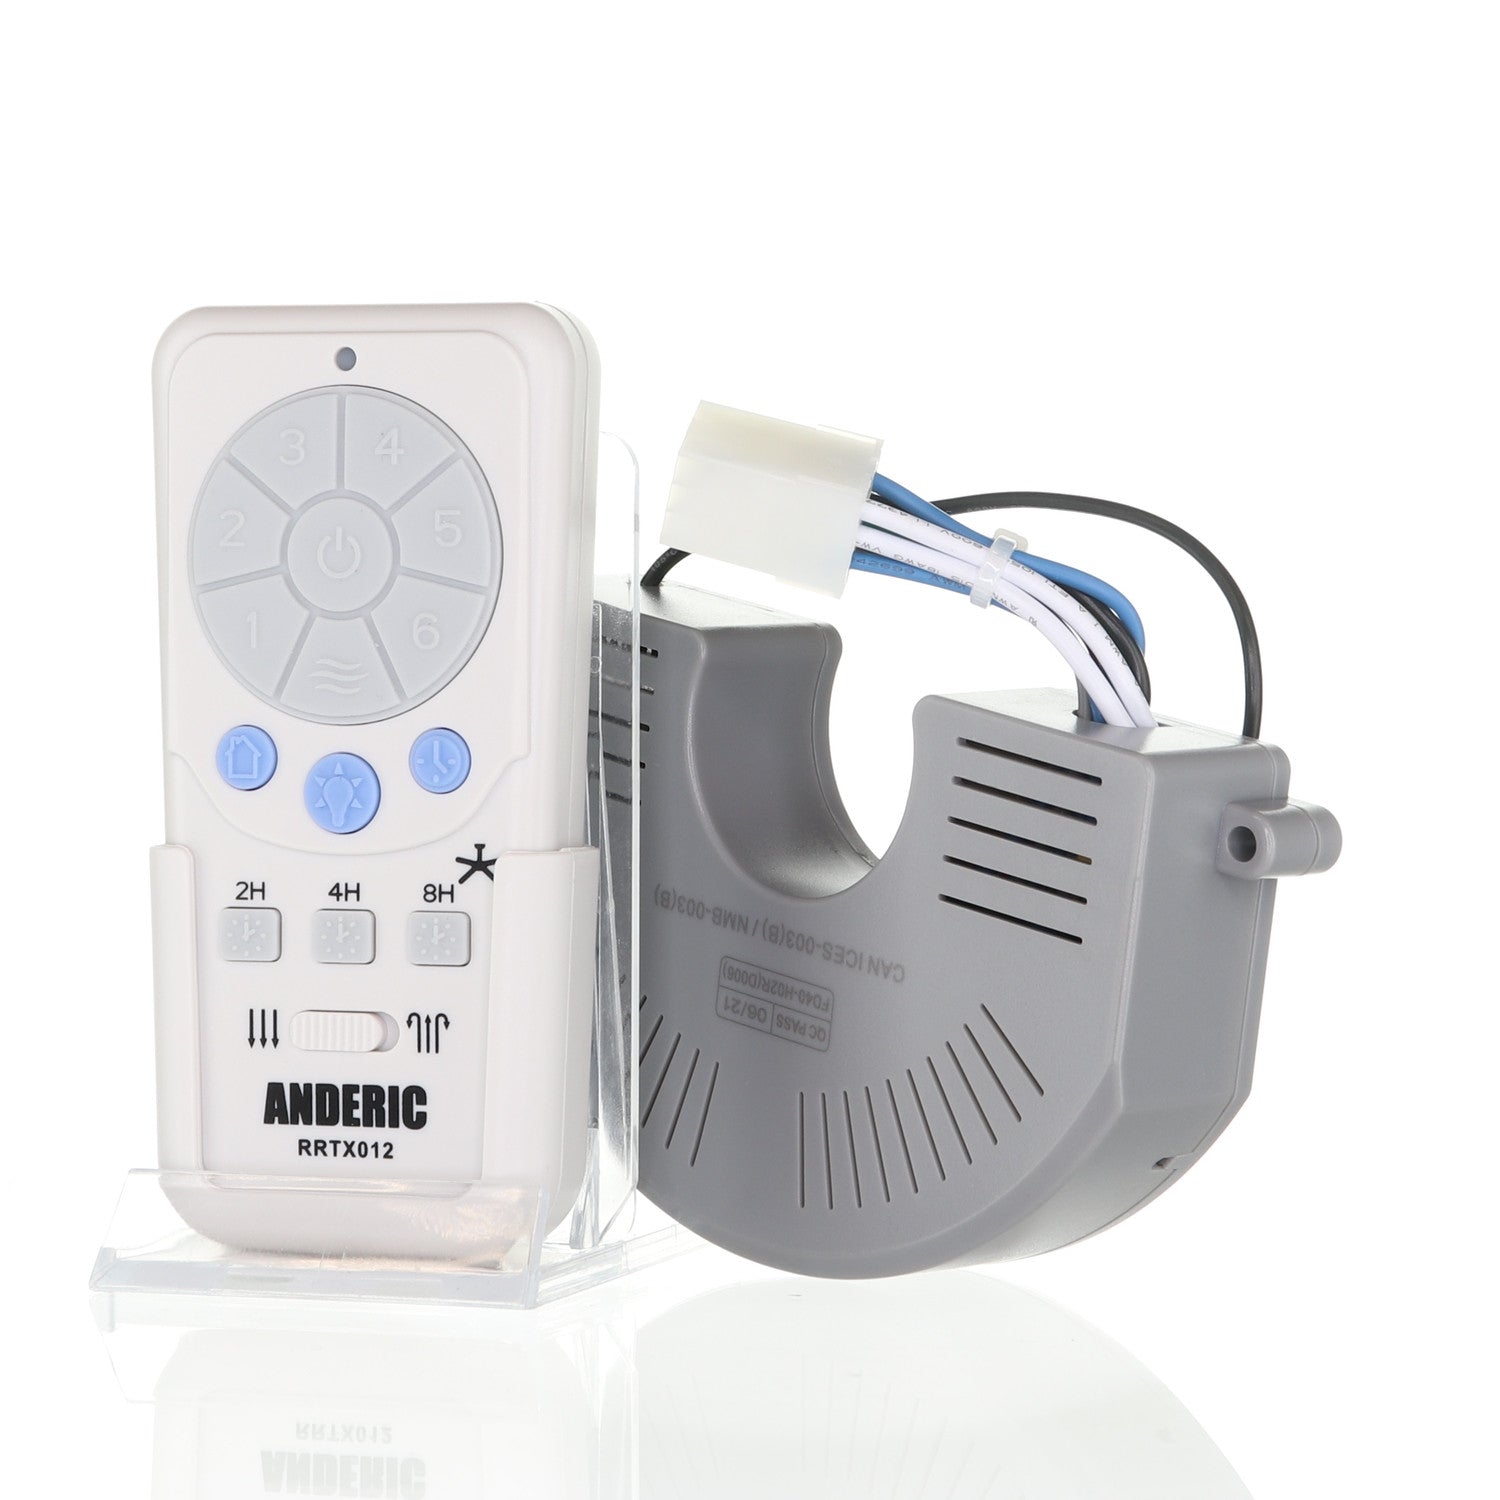 A25-TX012 / FD40-H02R KIT Ceiling Fan Replacement Remote Control Kit for Harbor Breeze® Ceiling Fans